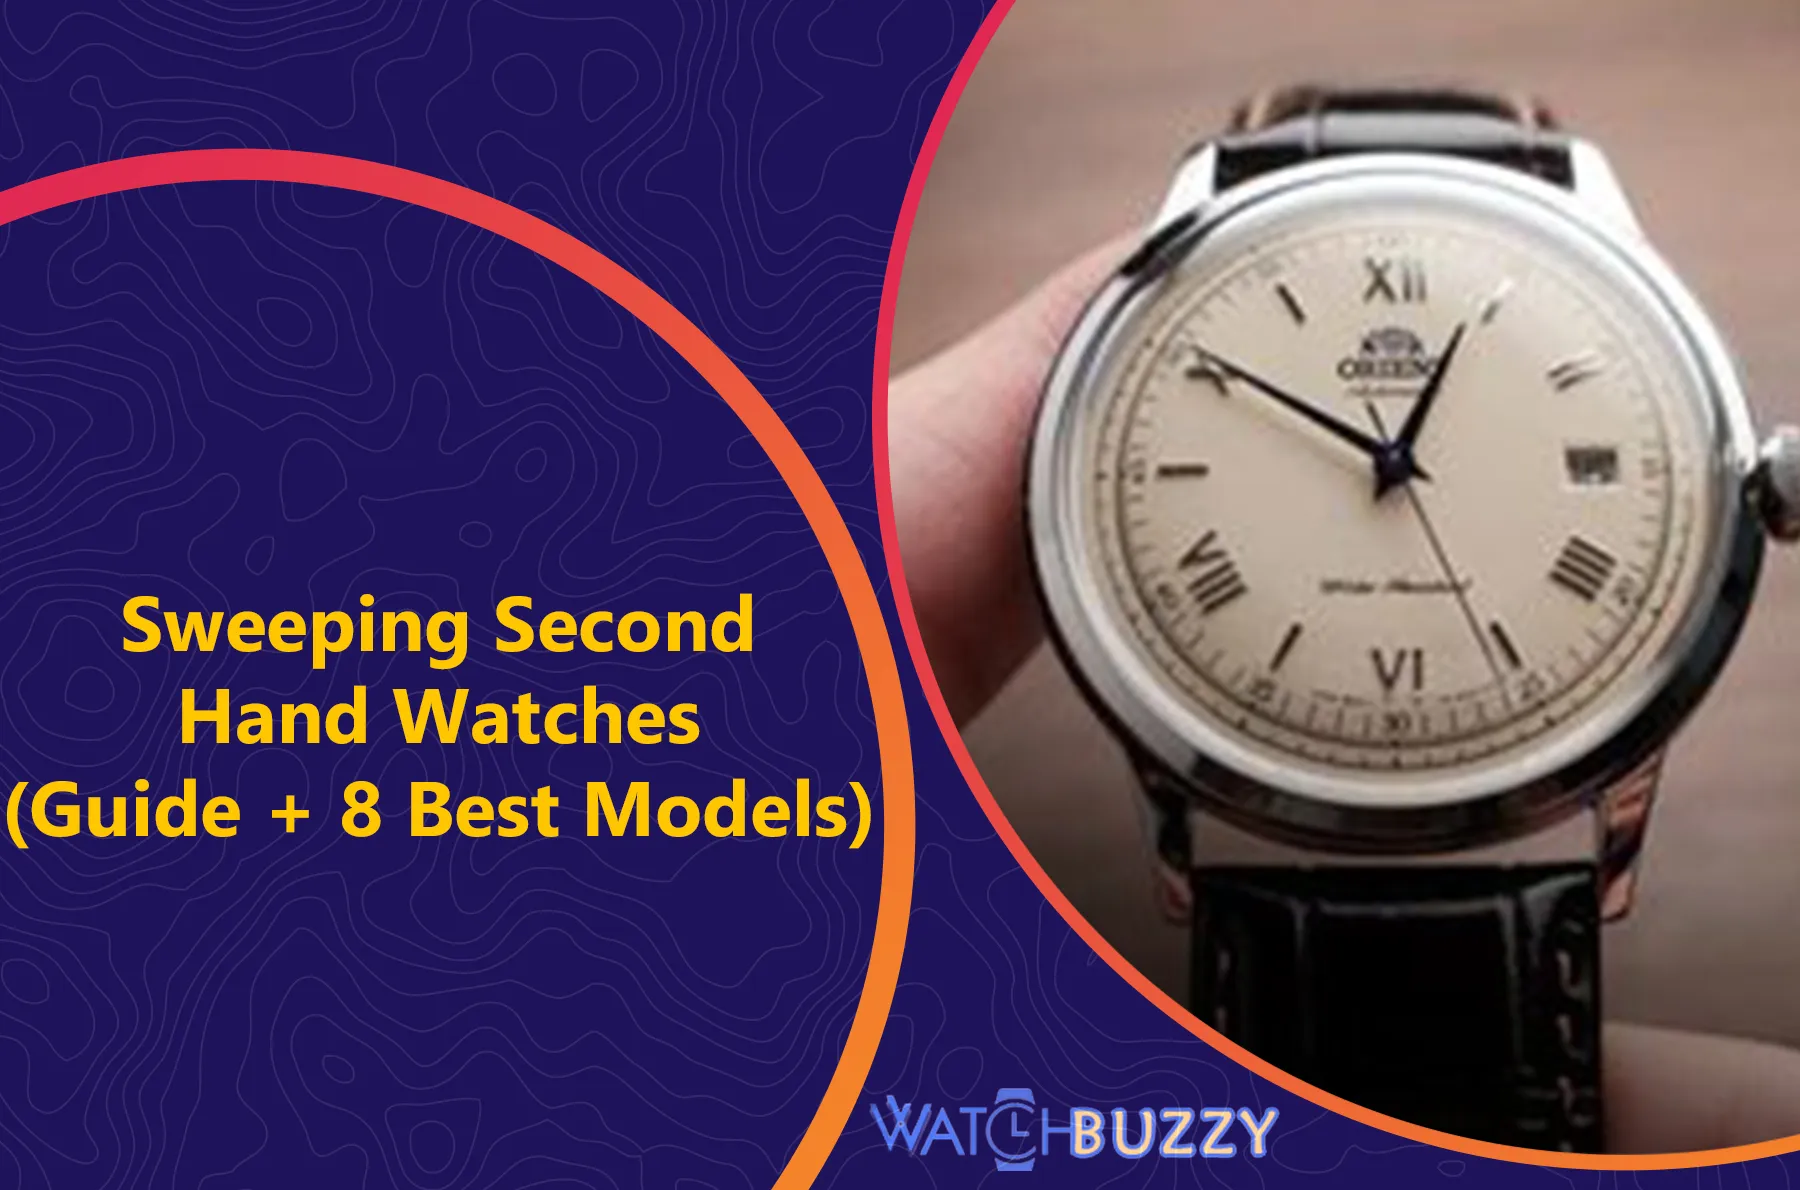 Sweeping Second Hand Watches (Guide + 8 Best Models)